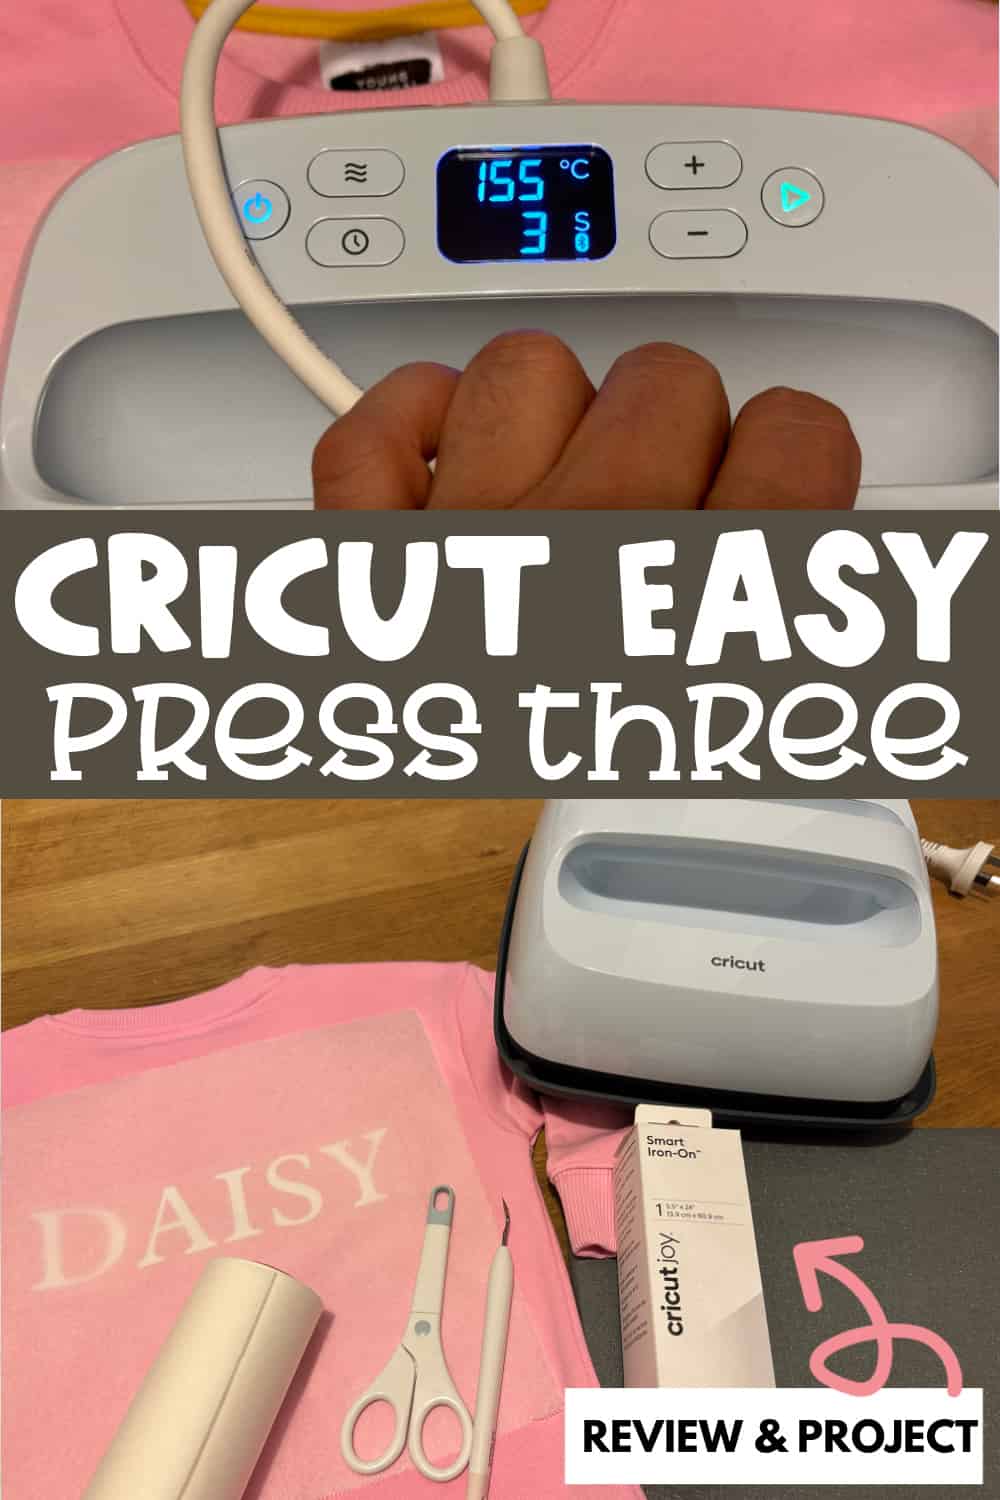 Cricut EasyPress 2 - Which EasyPress is right for you?